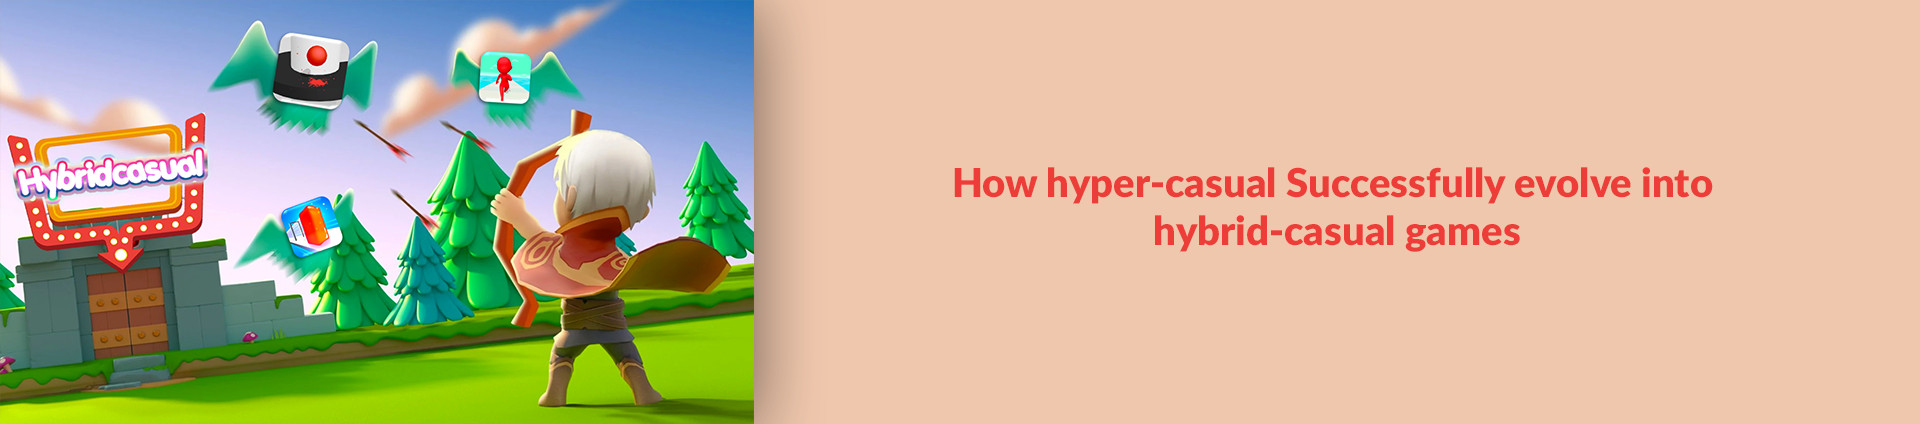 Where Are The Hybridcasual Hits? — Arcade, Hypercasual, Sport